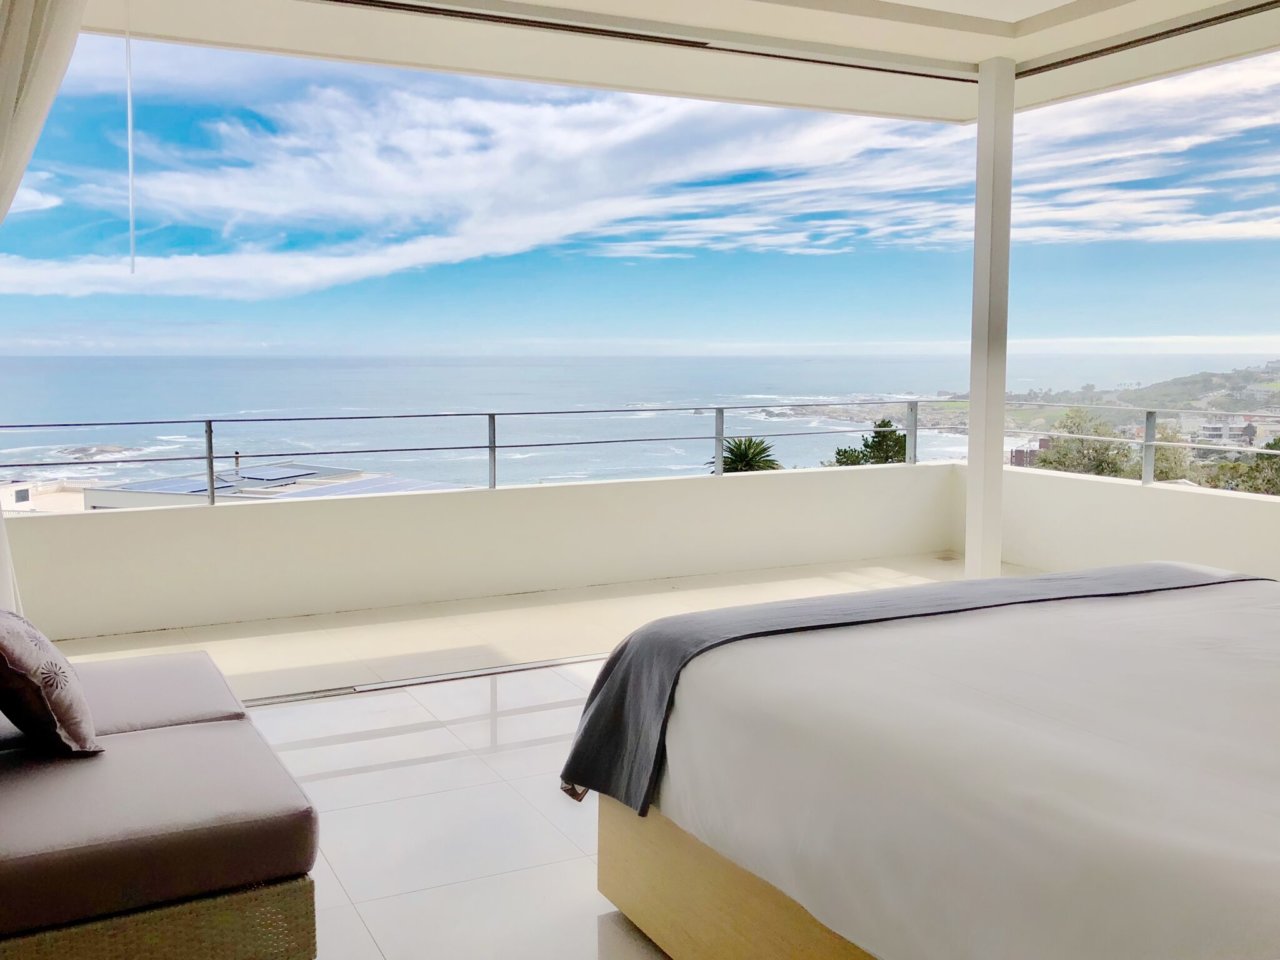 Photo 14 of Aqua Villa accommodation in Camps Bay, Cape Town with 5 bedrooms and 5 bathrooms